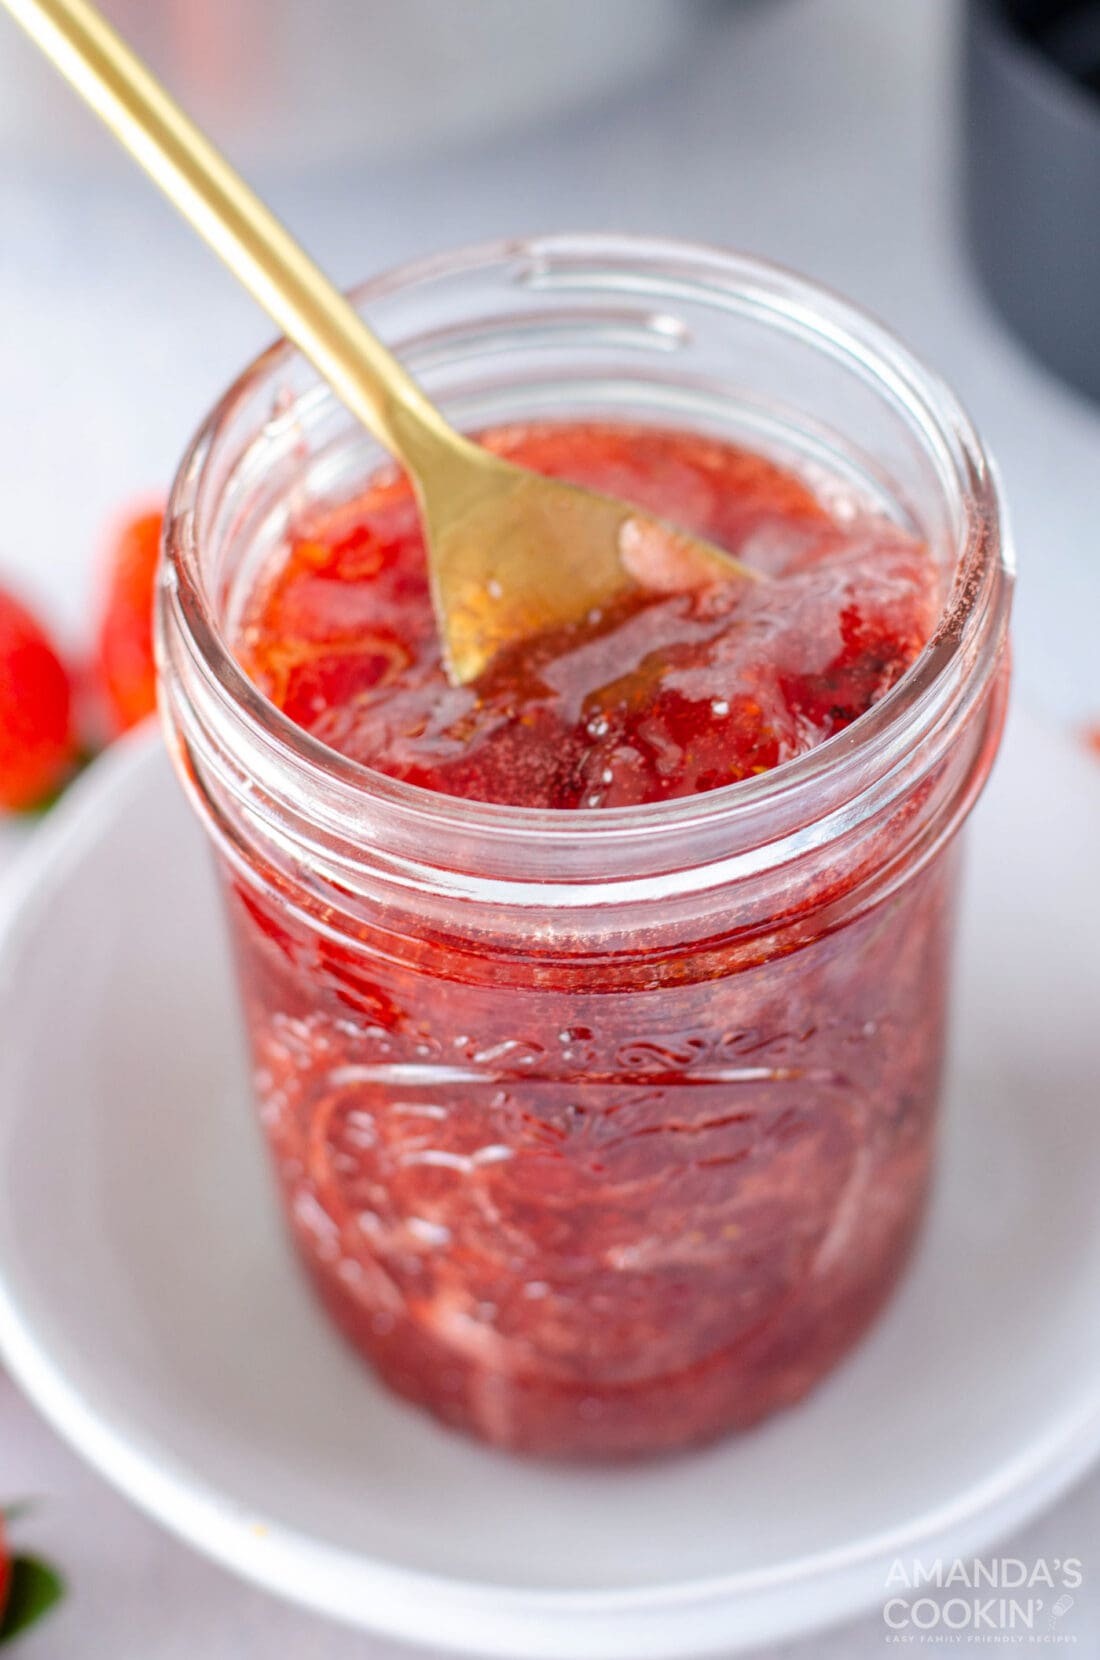 SPOON IN A JAR OF strawberry jam